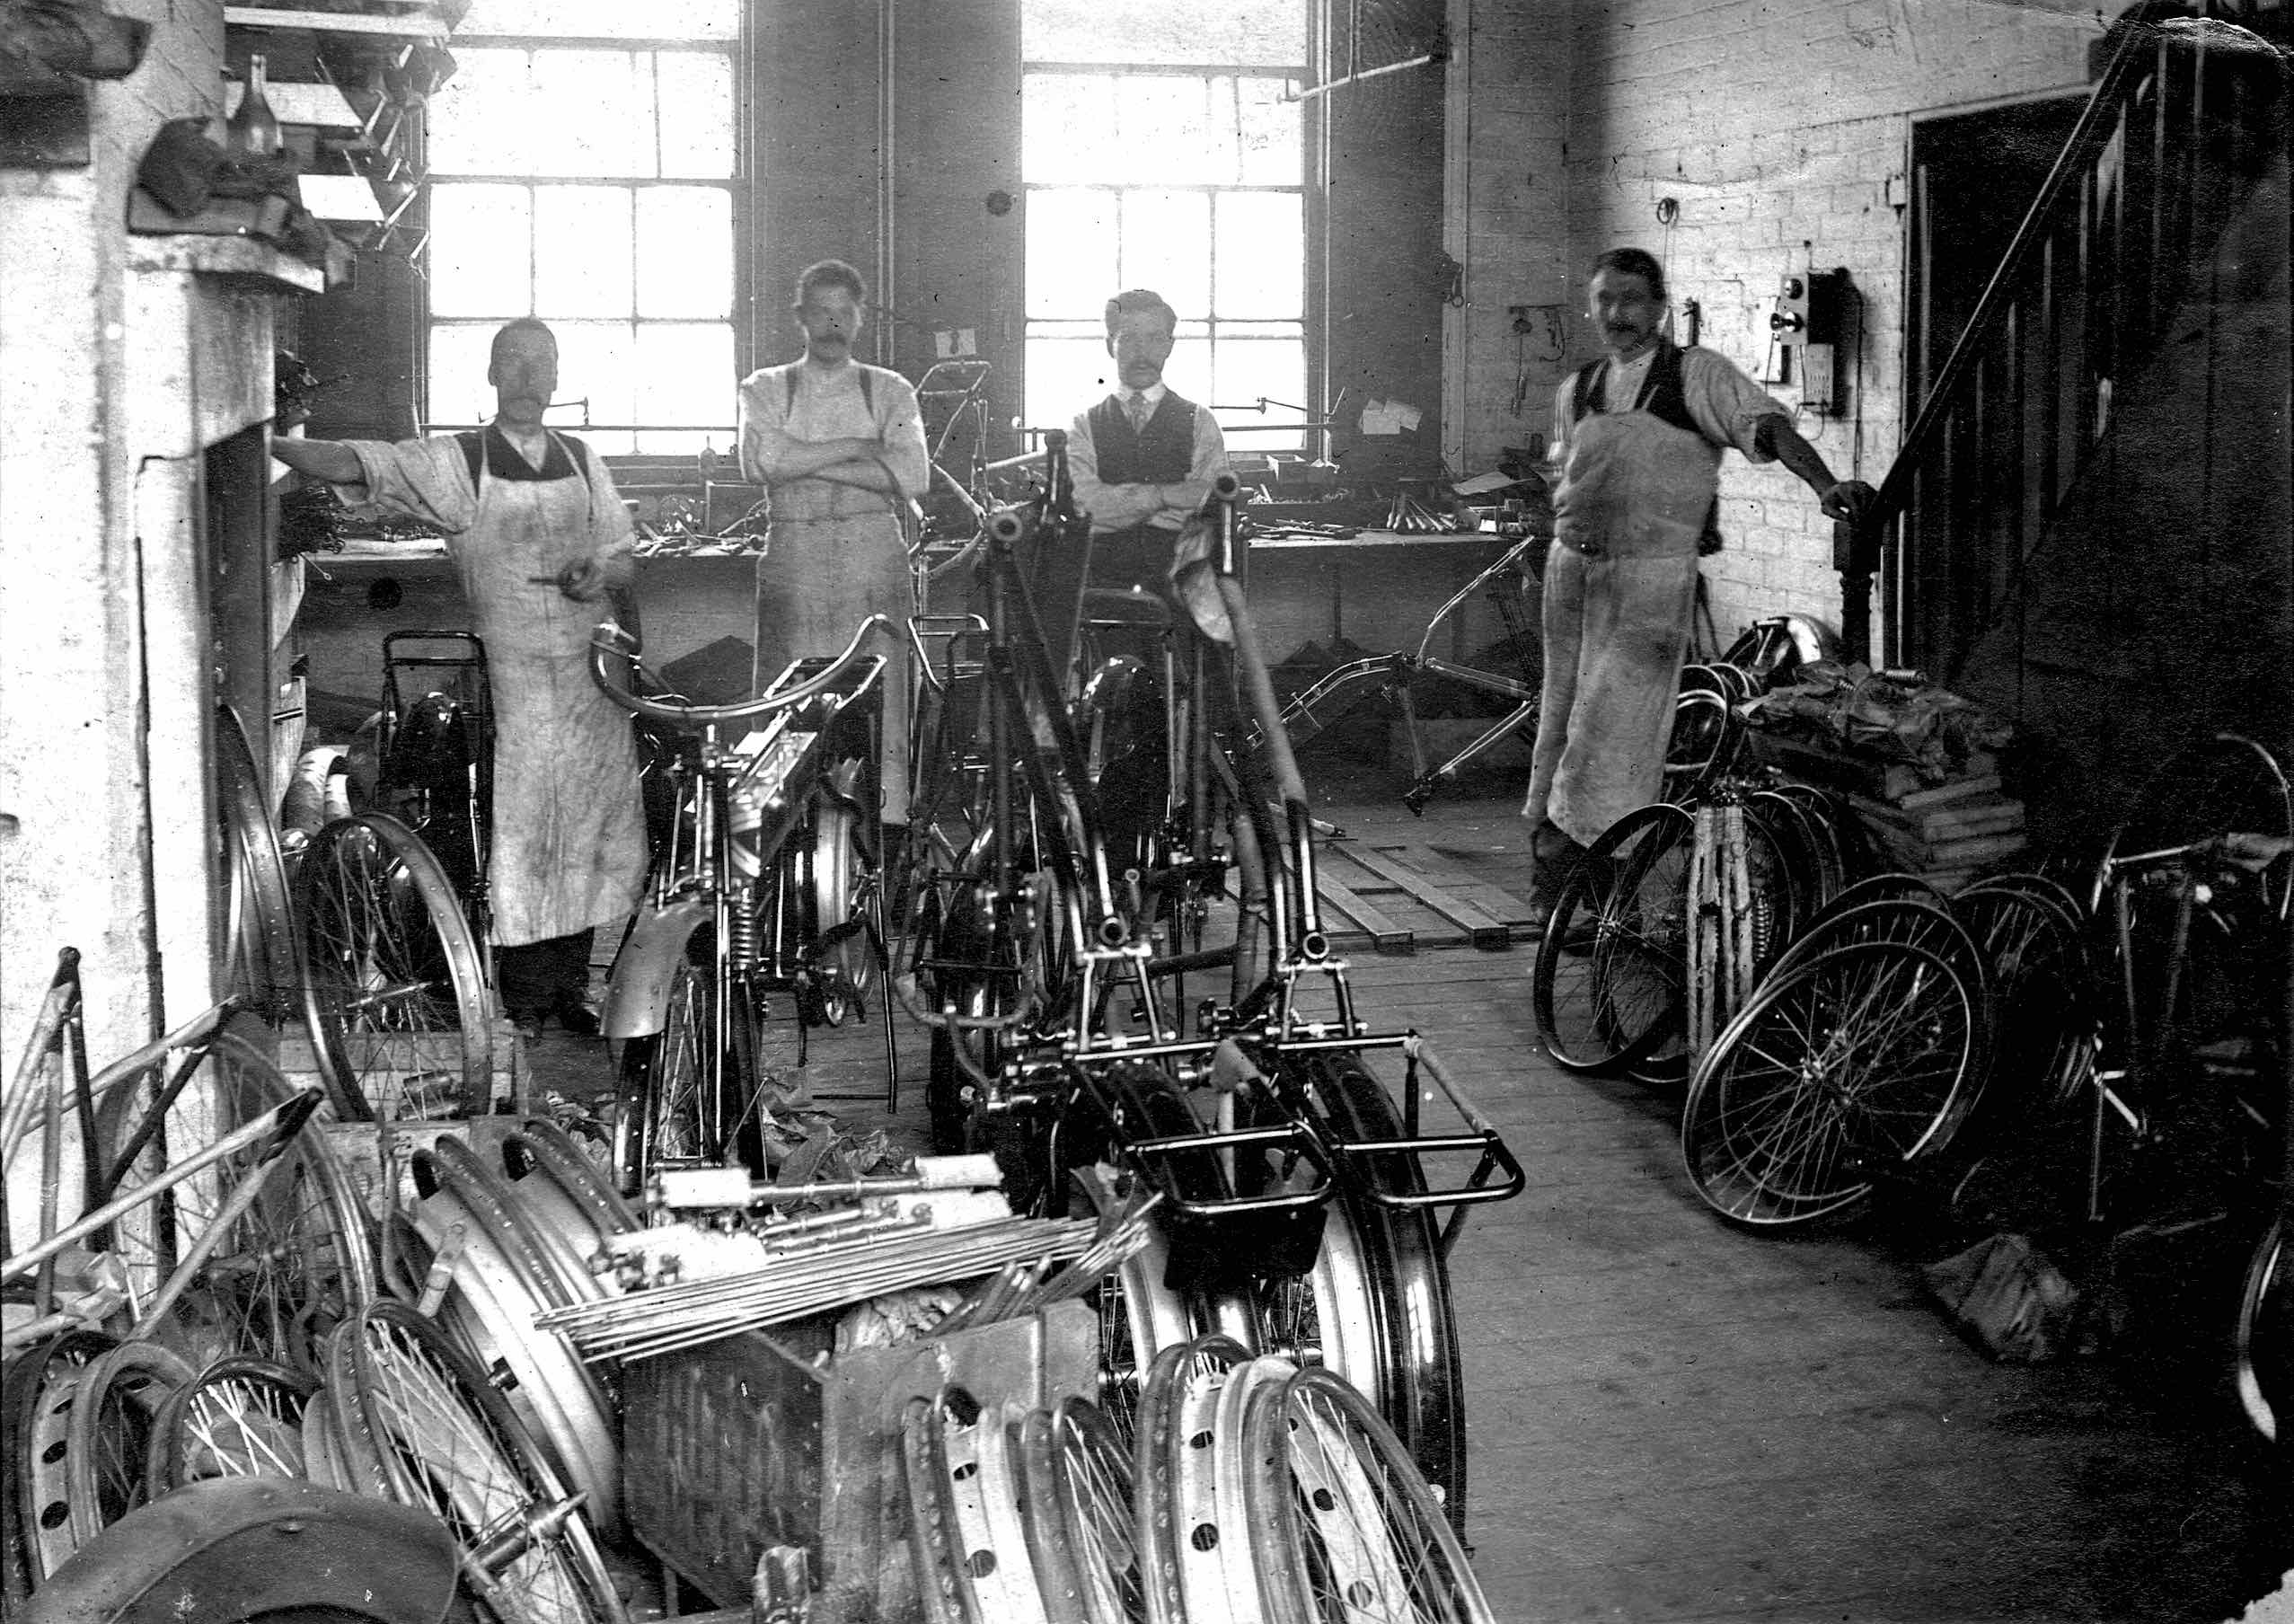 A H Haden Ltd motorcycle assembly c.1920